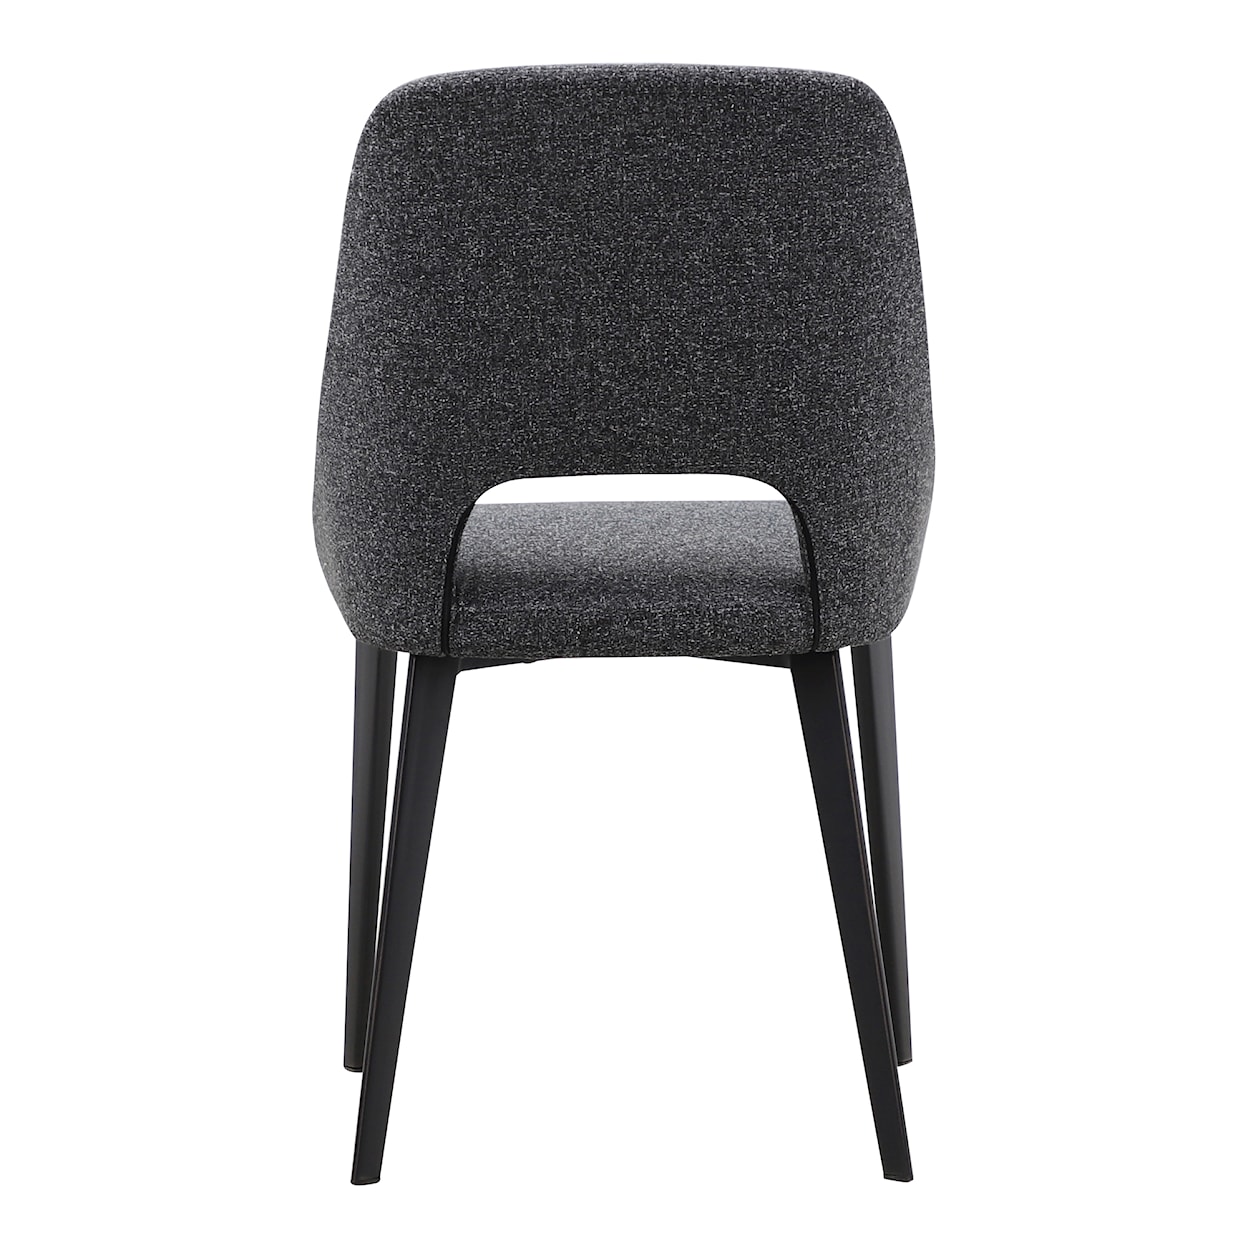 Moe's Home Collection Tizz Tizz Dining Chair Dark Grey